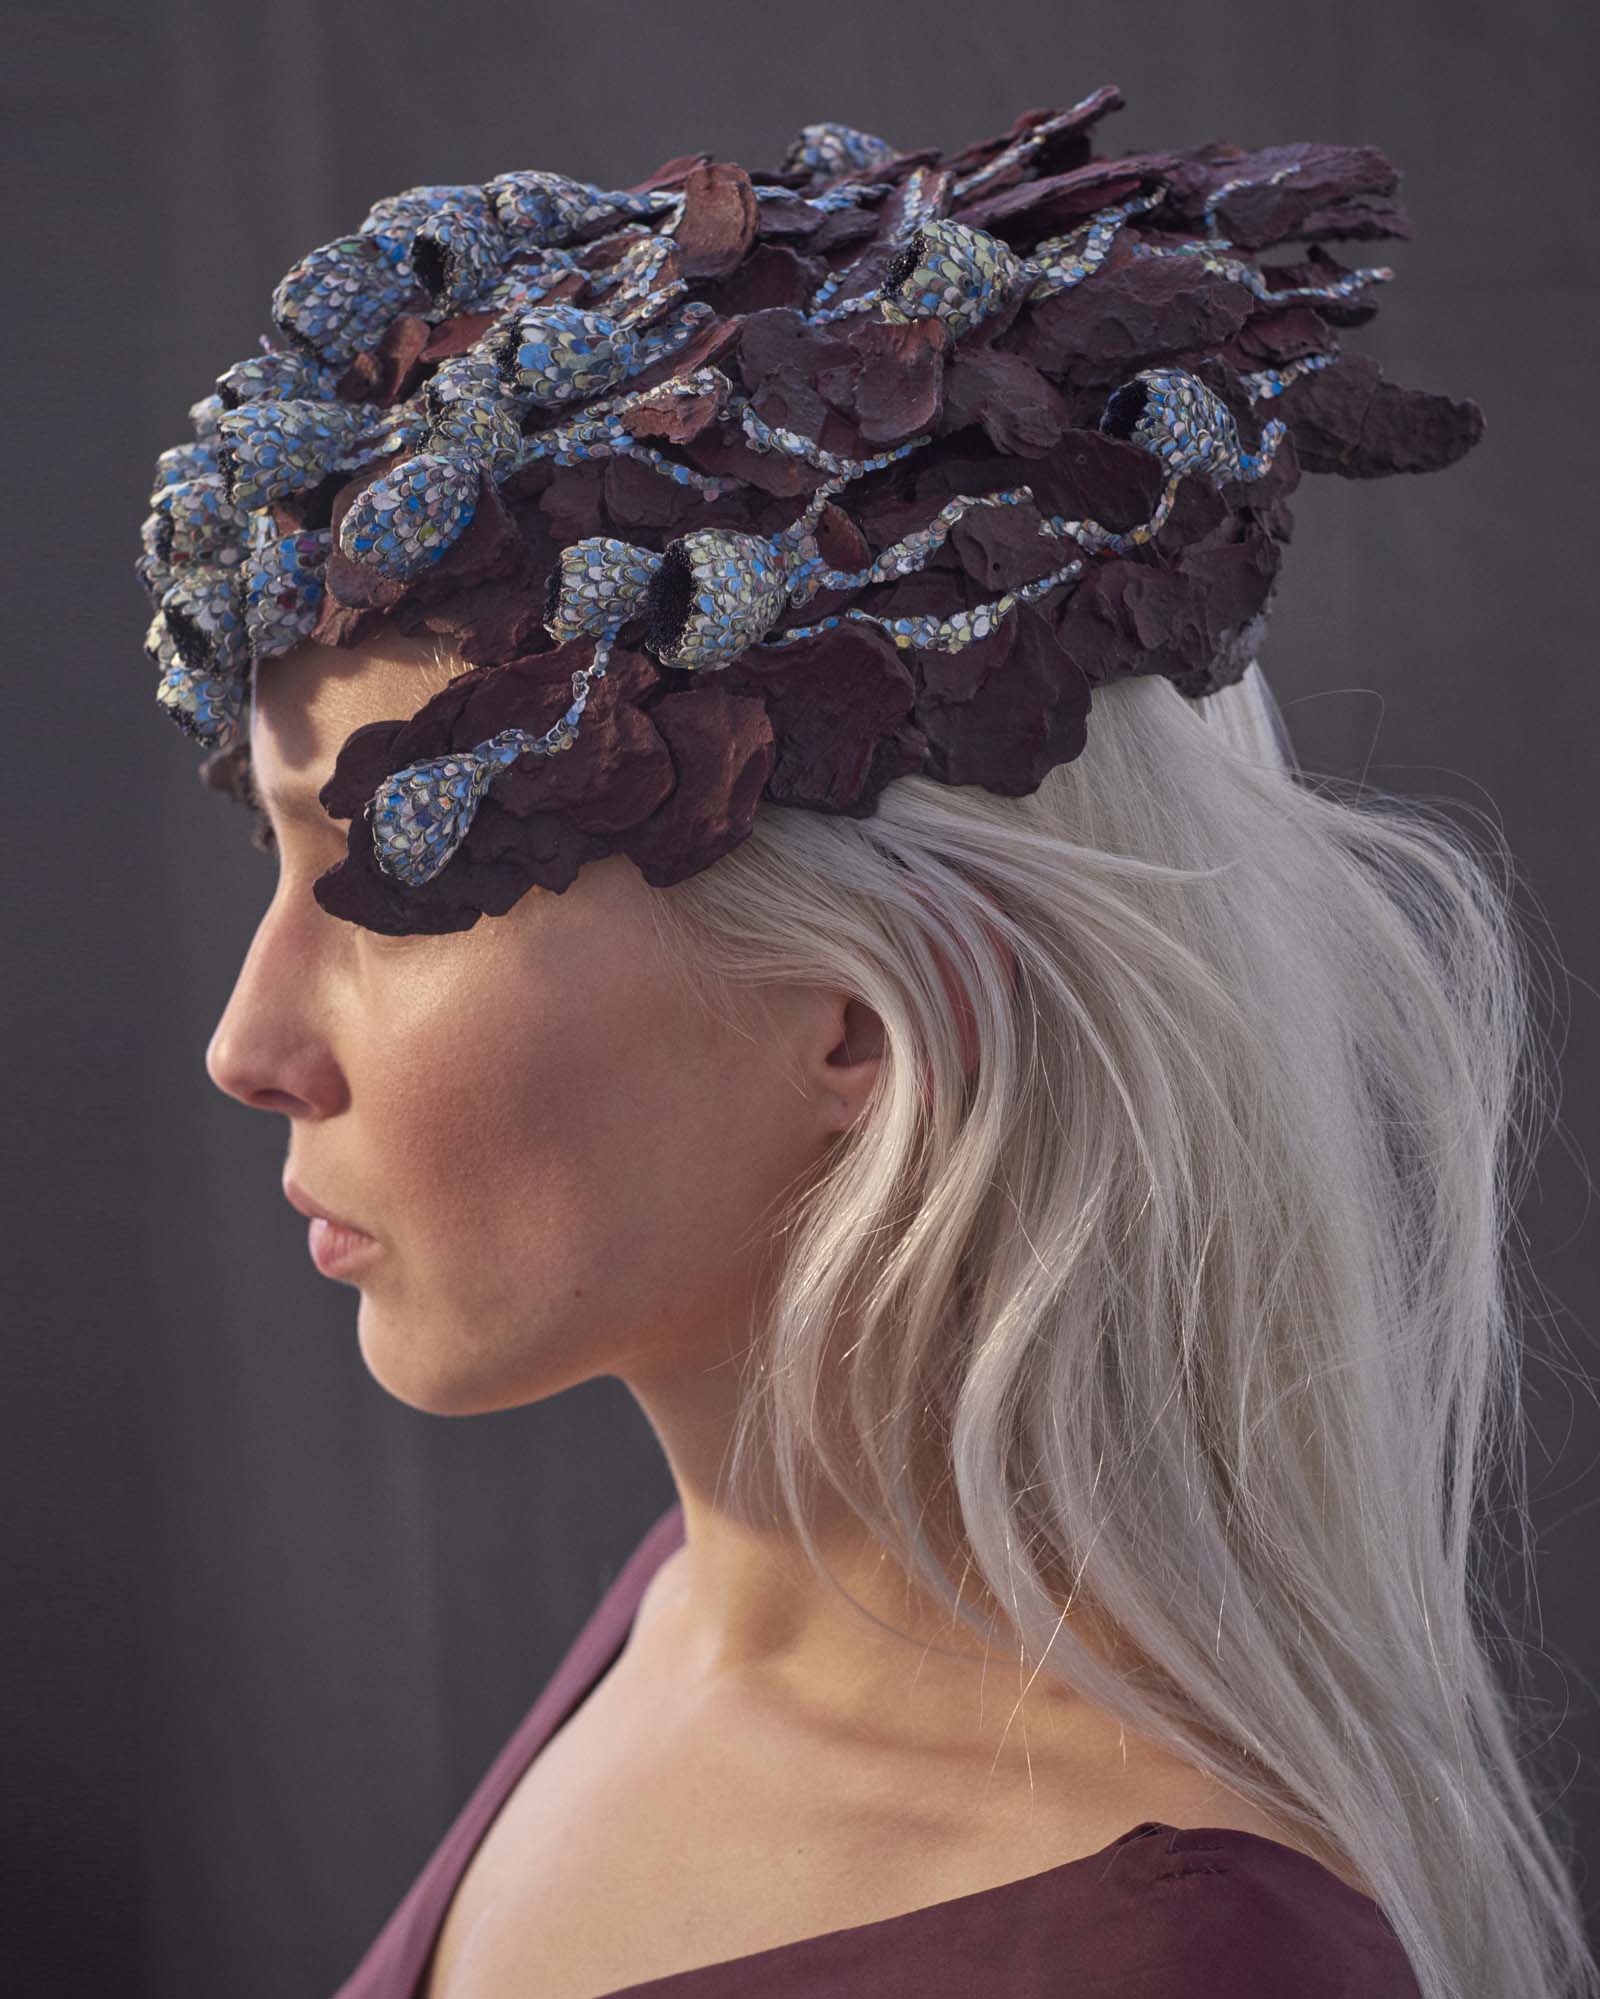 "In The Beginning There Was Red" I Headpiece, 2017 I Wood bark, graffiti, almond shells, glass, paint I Photo: Laurens Grigoleit